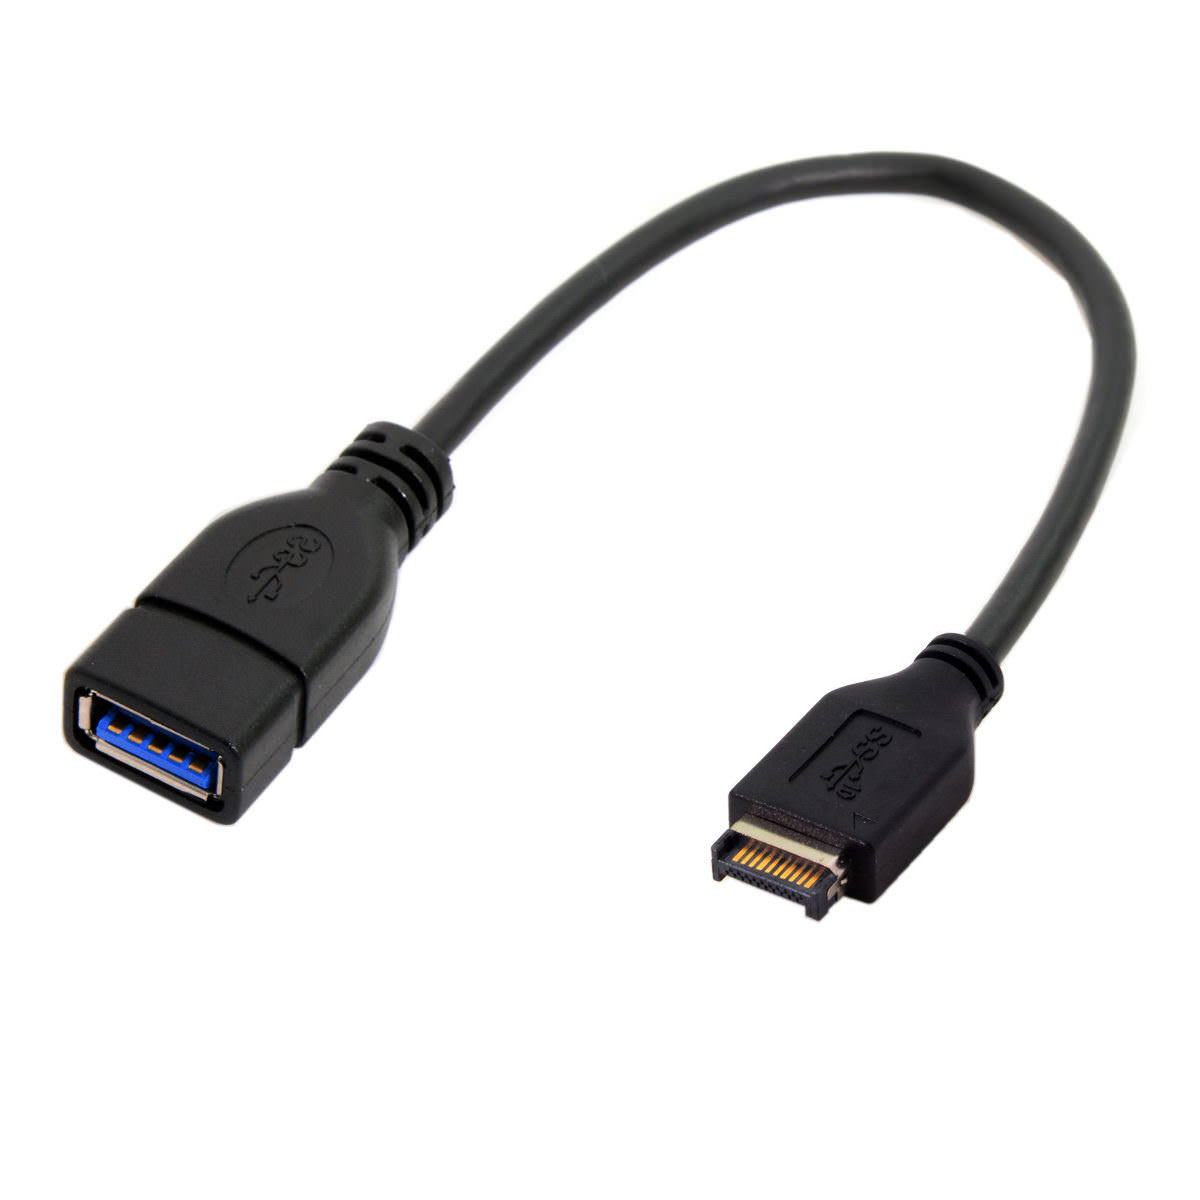 USB_3.1_Type_E_Front_Panel_Header_to_Type_A_Female_Adapter_Cable_20cm_(4)__96577_zoom.jpg